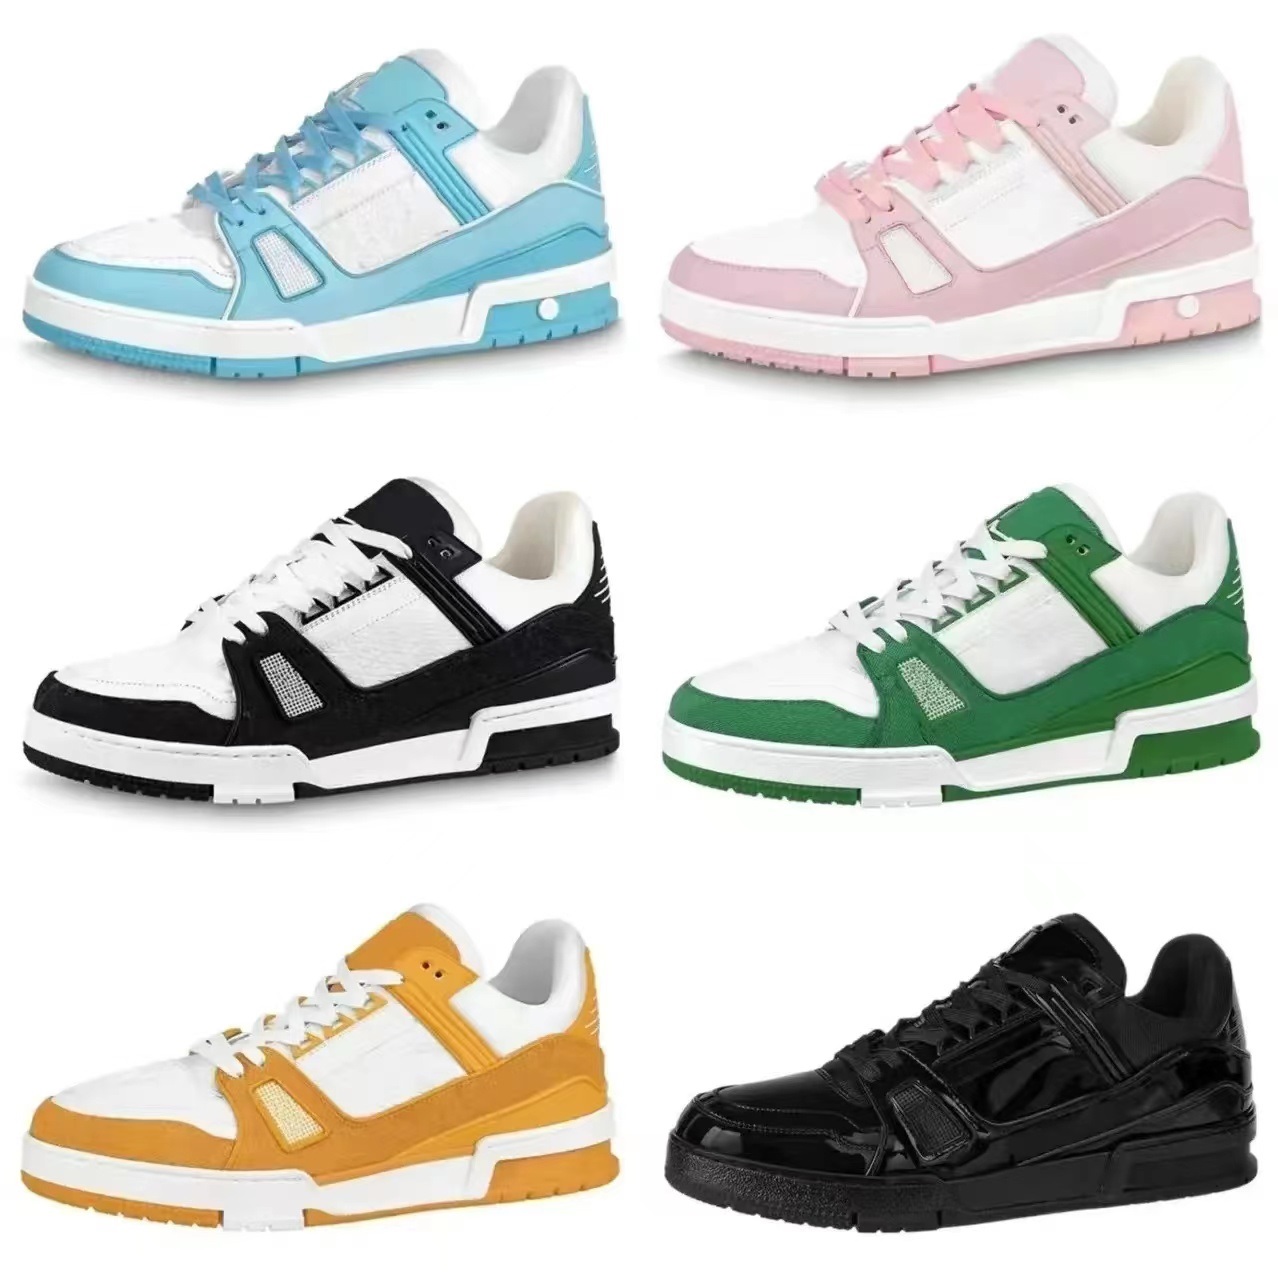 

Liv Designer Trainer Sneaker Virgil Casual shoes Calfskin Leather Abloh Black White Green Red Blue Overlays Platform top Low Sneakers size 36-45, 15